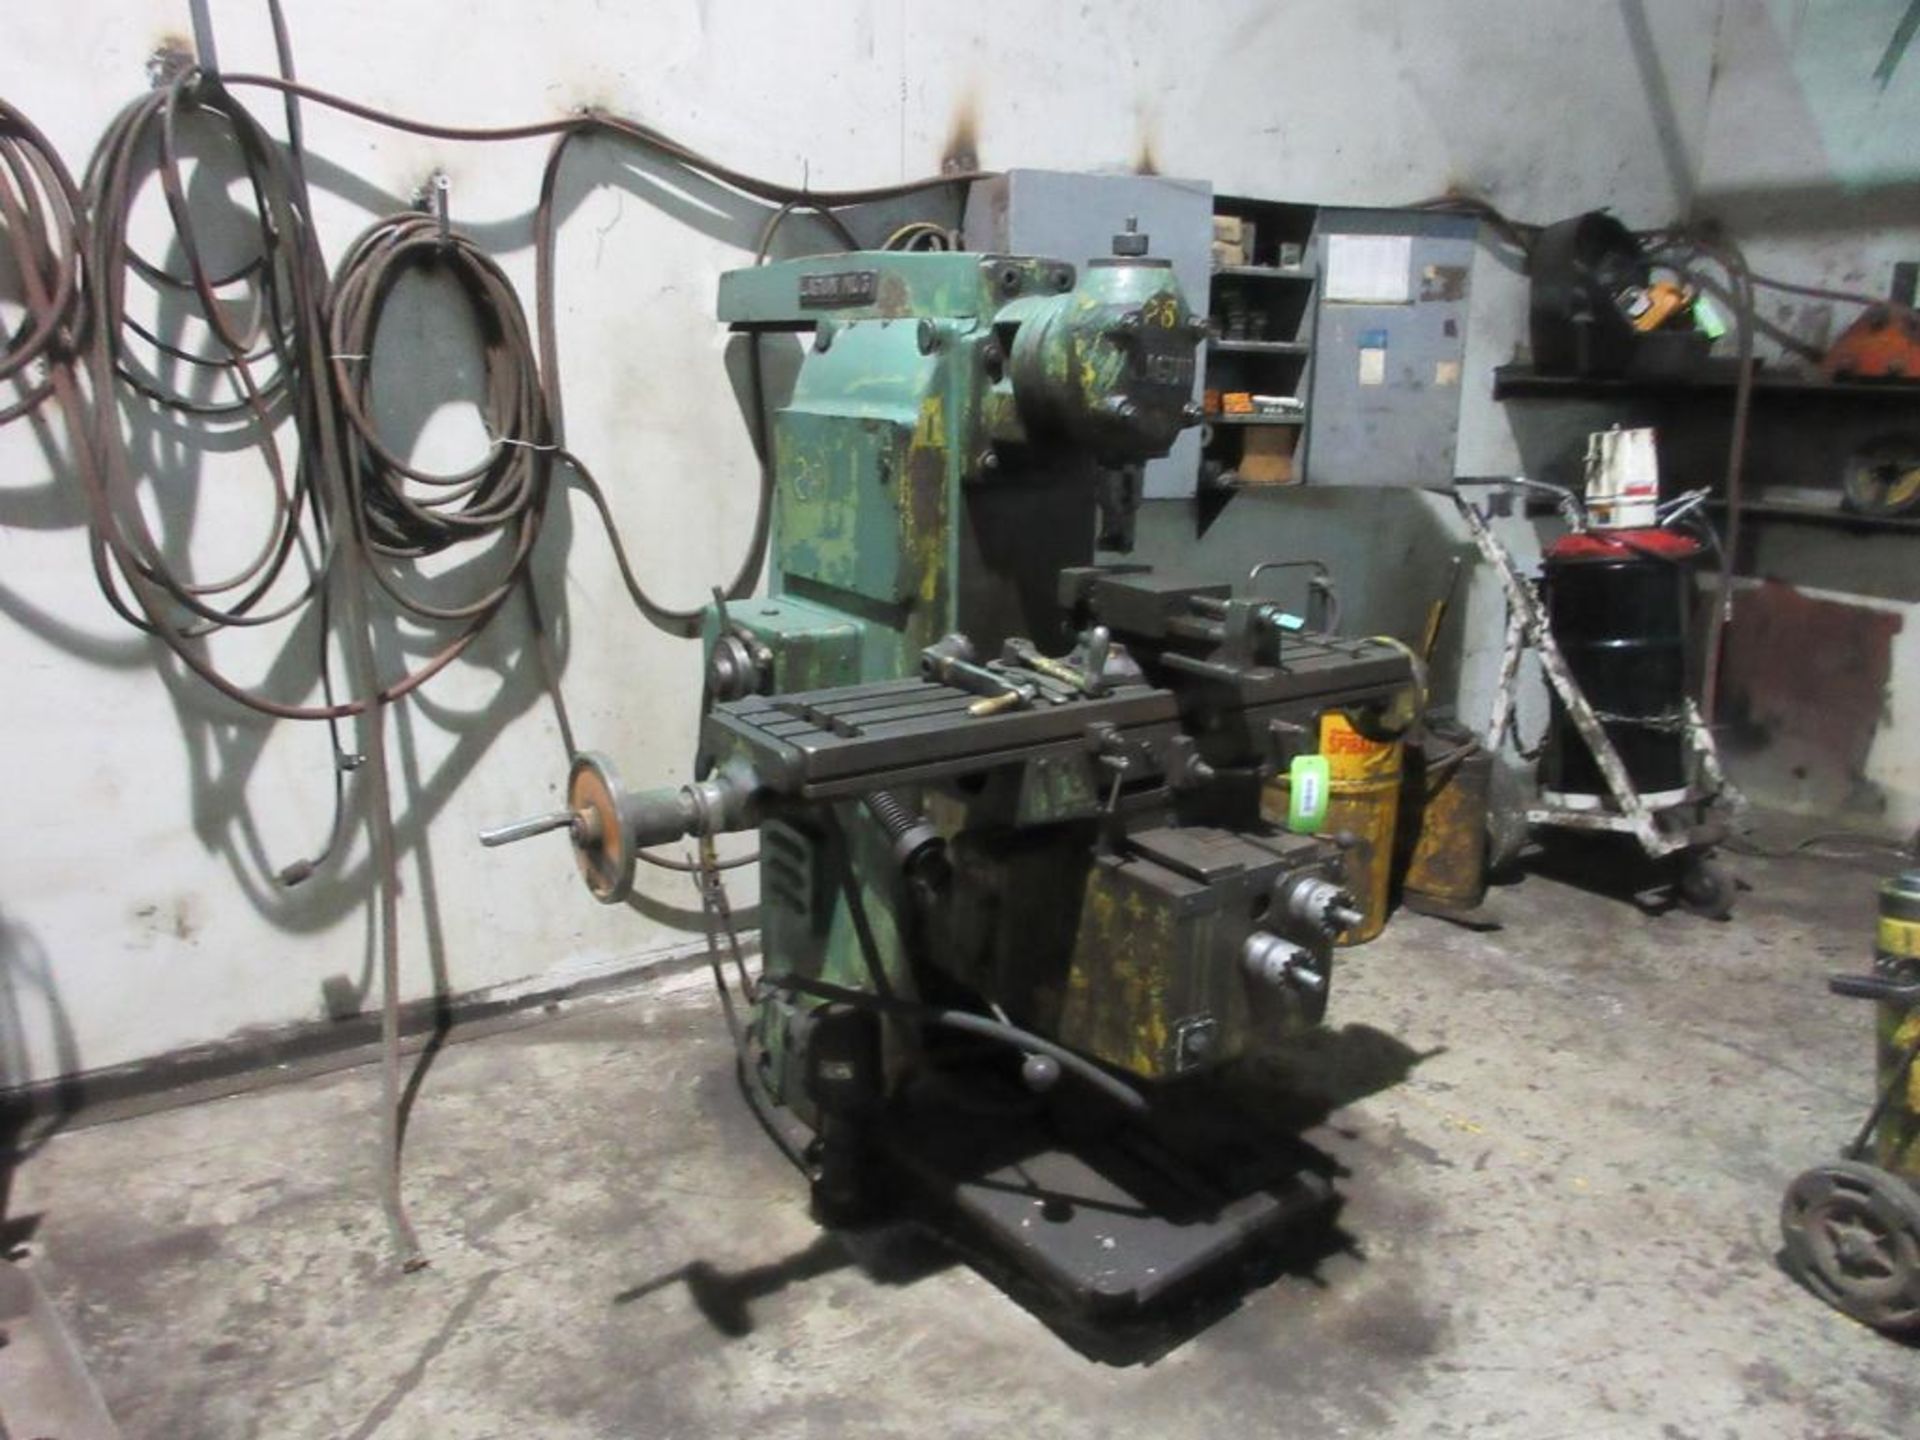 LAGUN MILLING MACHINE WITH 10' X 44" TABLE, 6" VISE, 3" SPINDLE WITH CUTTING TOOL, 28 TO 606RPM (EAS